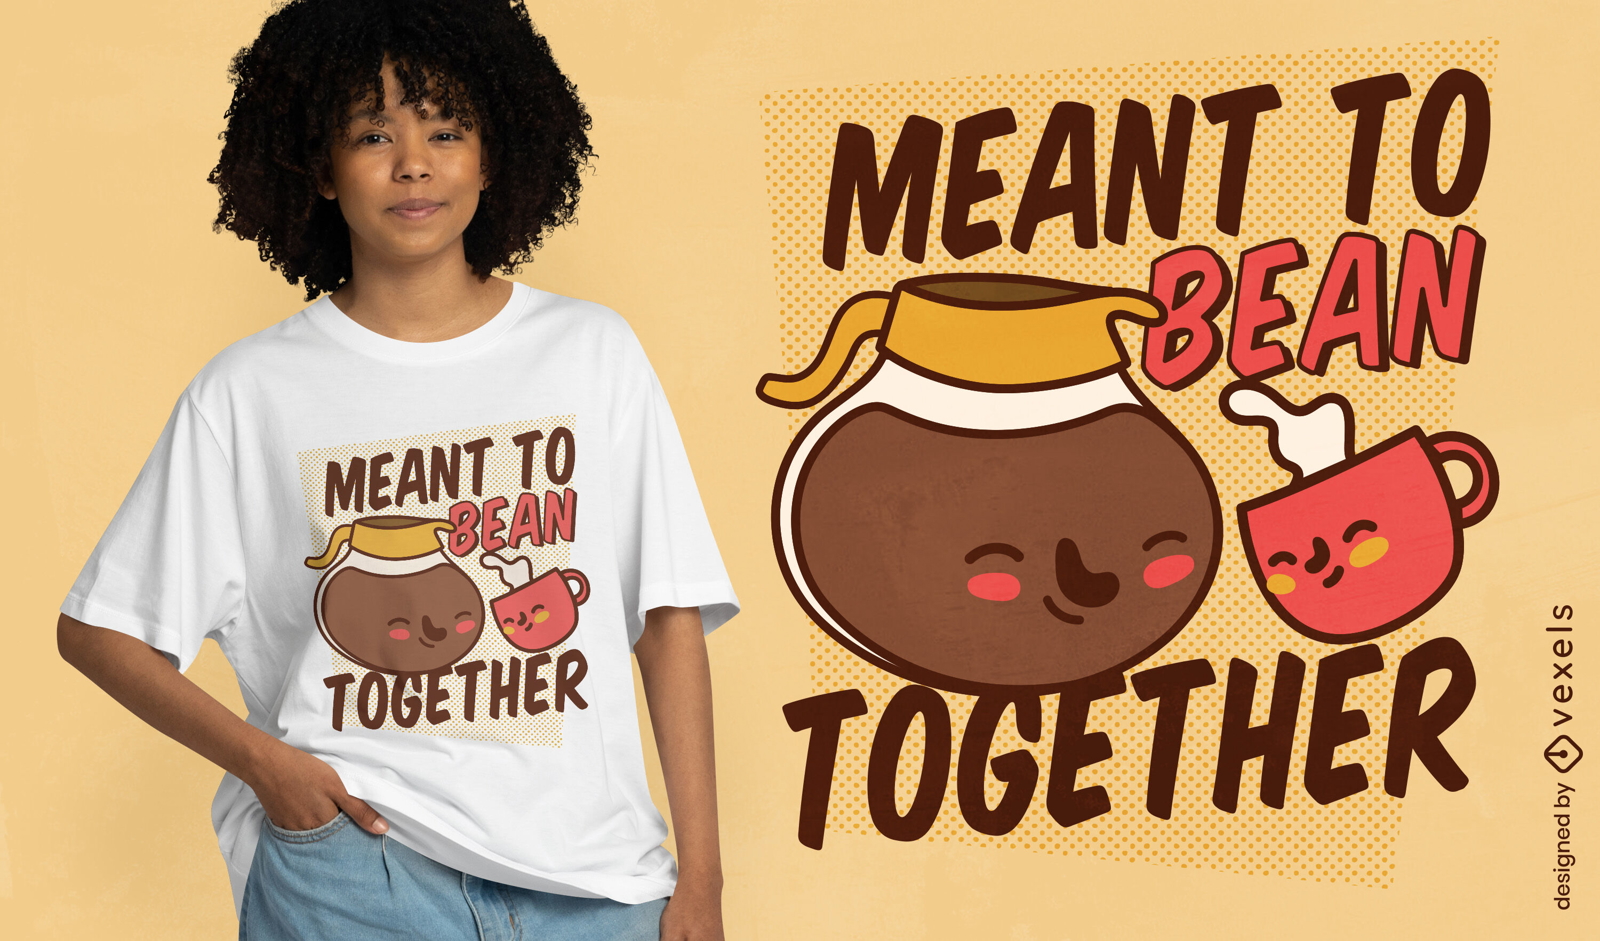 Meant to bean together t-shirt design